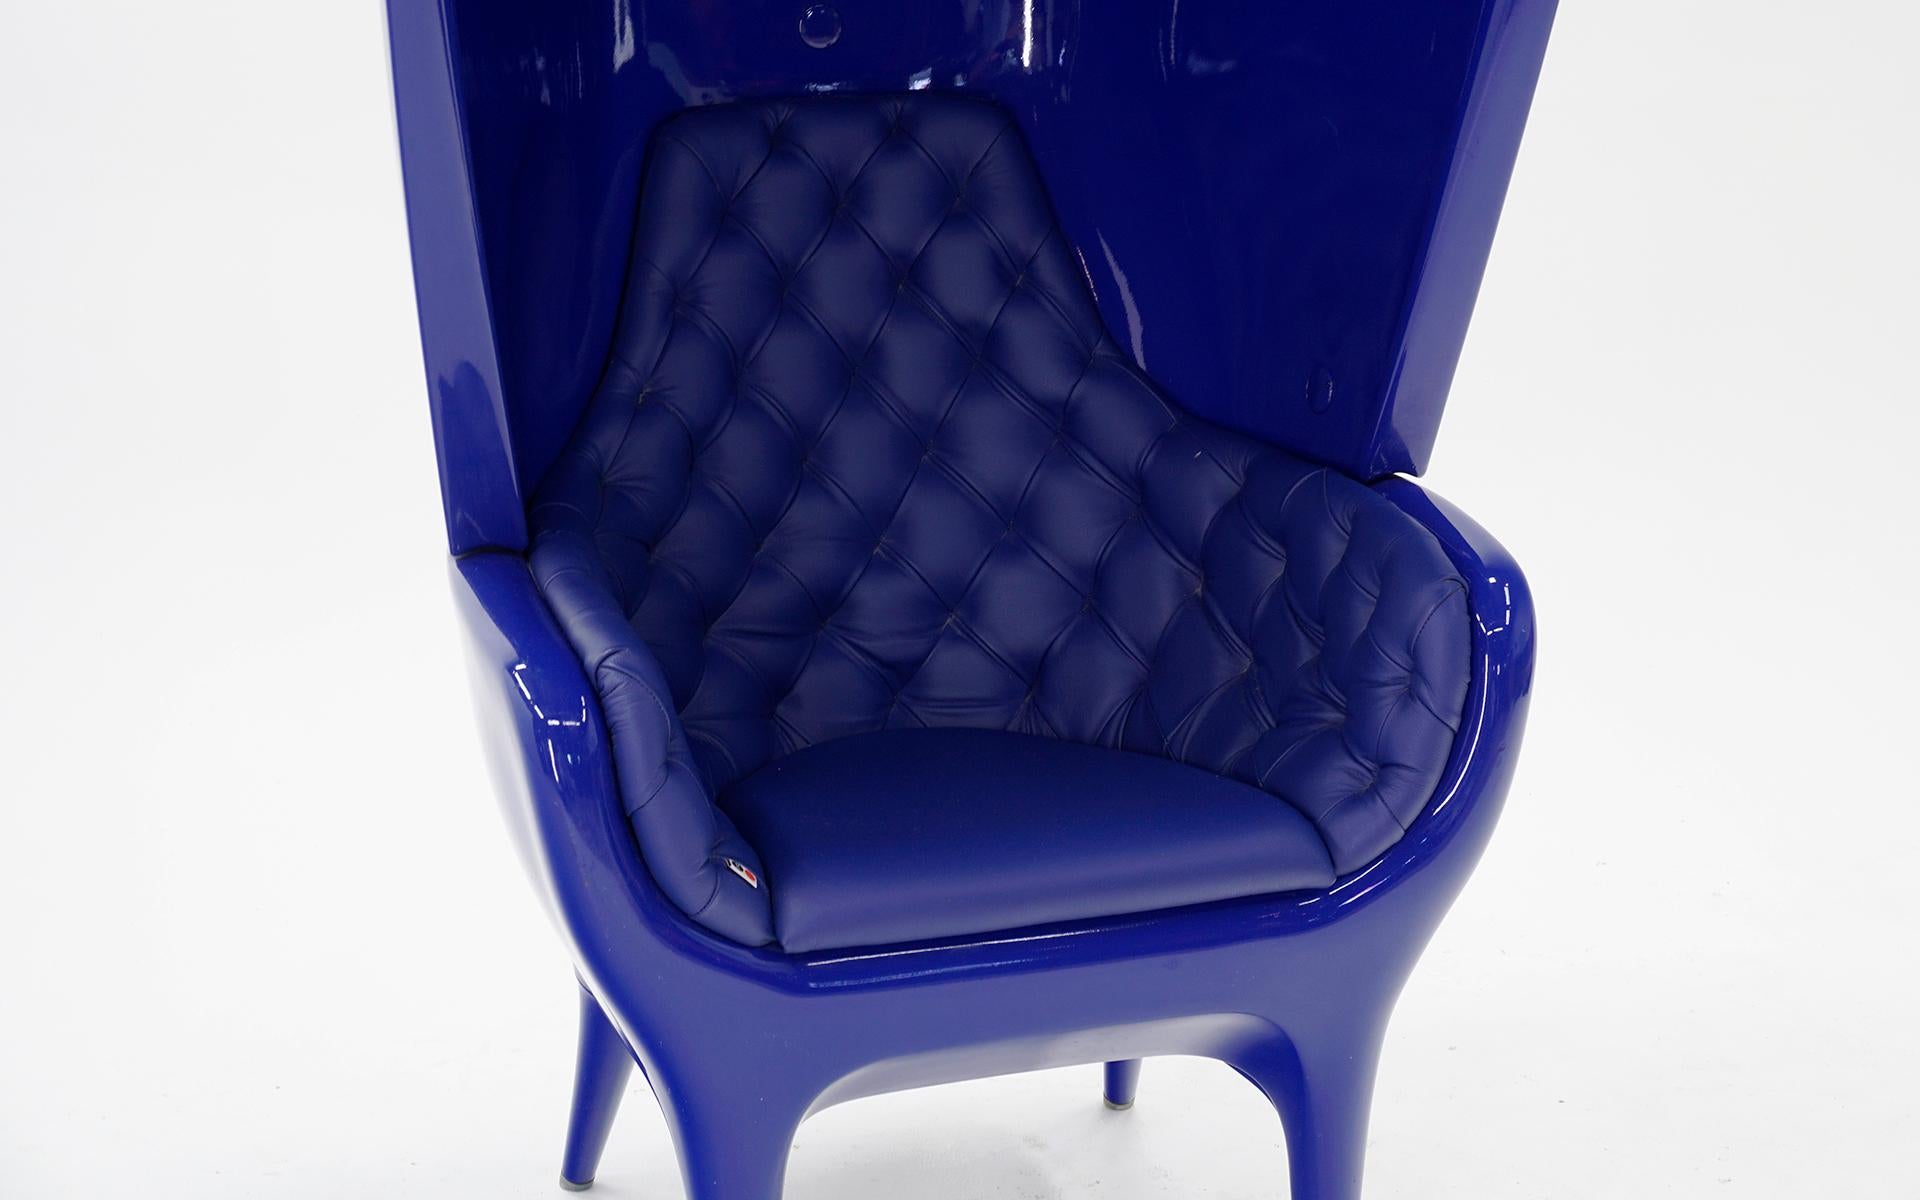 Spanish Huge Showtime Armchair by Jaime Hayon, Spain, 2006, Blue Fiberglass and Leather